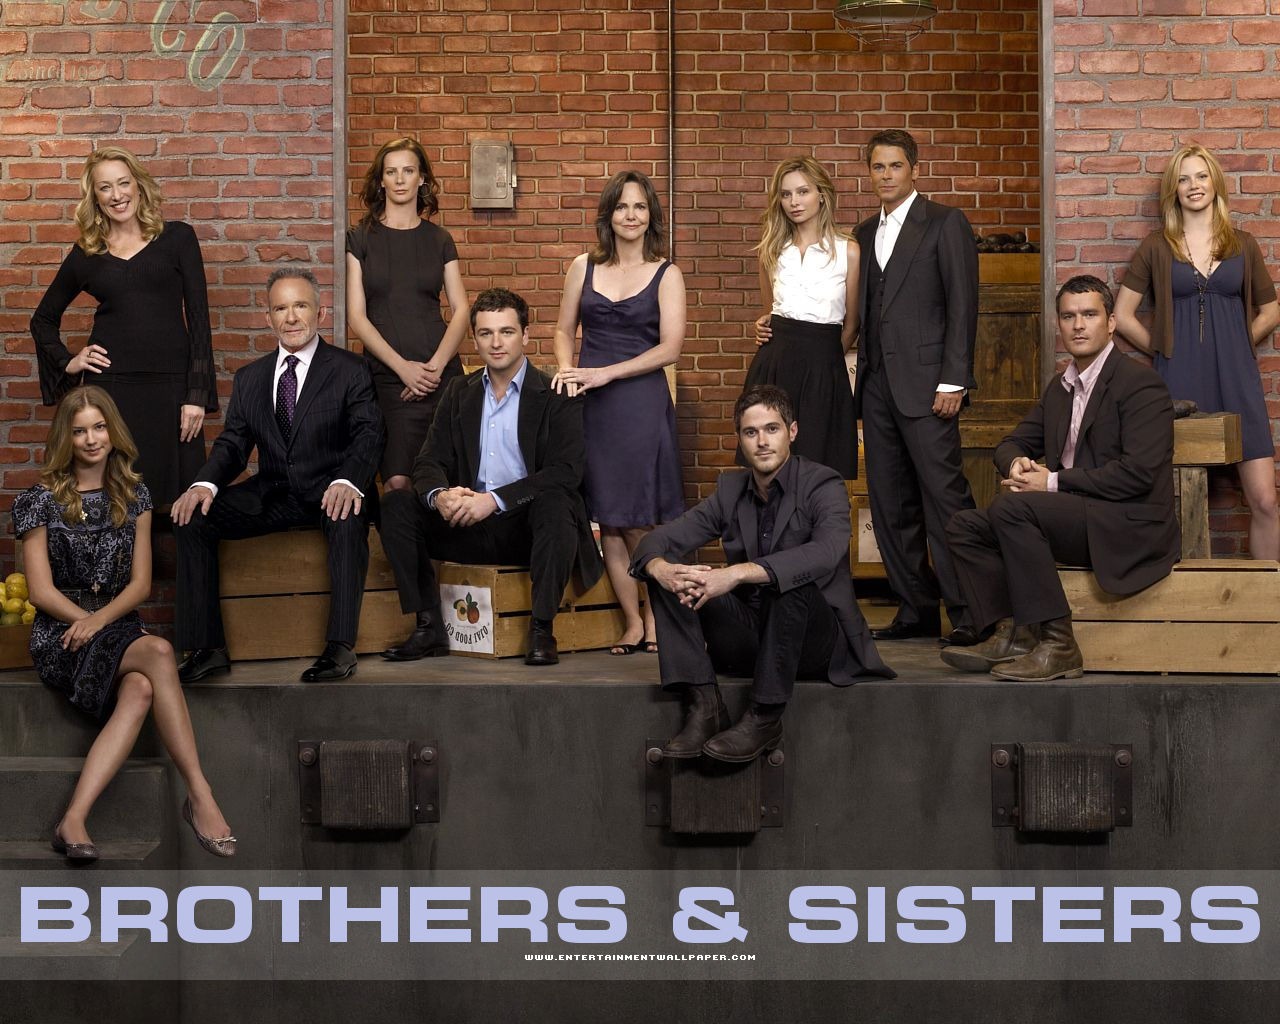 Brothers & Sisters wallpaper #22 - 1280x1024